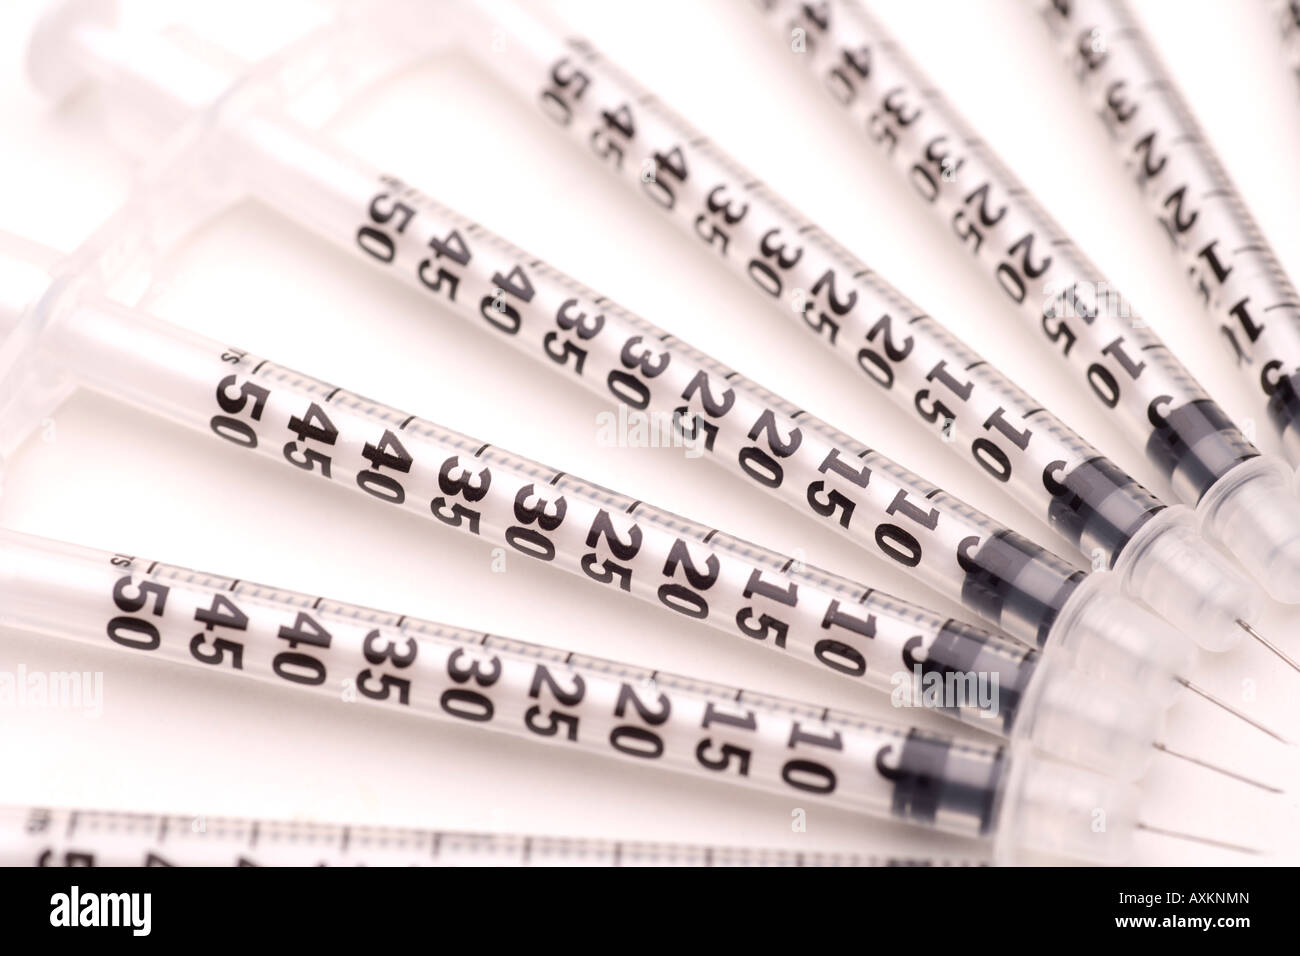 Medical syringes for injecting insulin diabetes close up of measuring scale on side of syringe and sharp needle at end Stock Photo